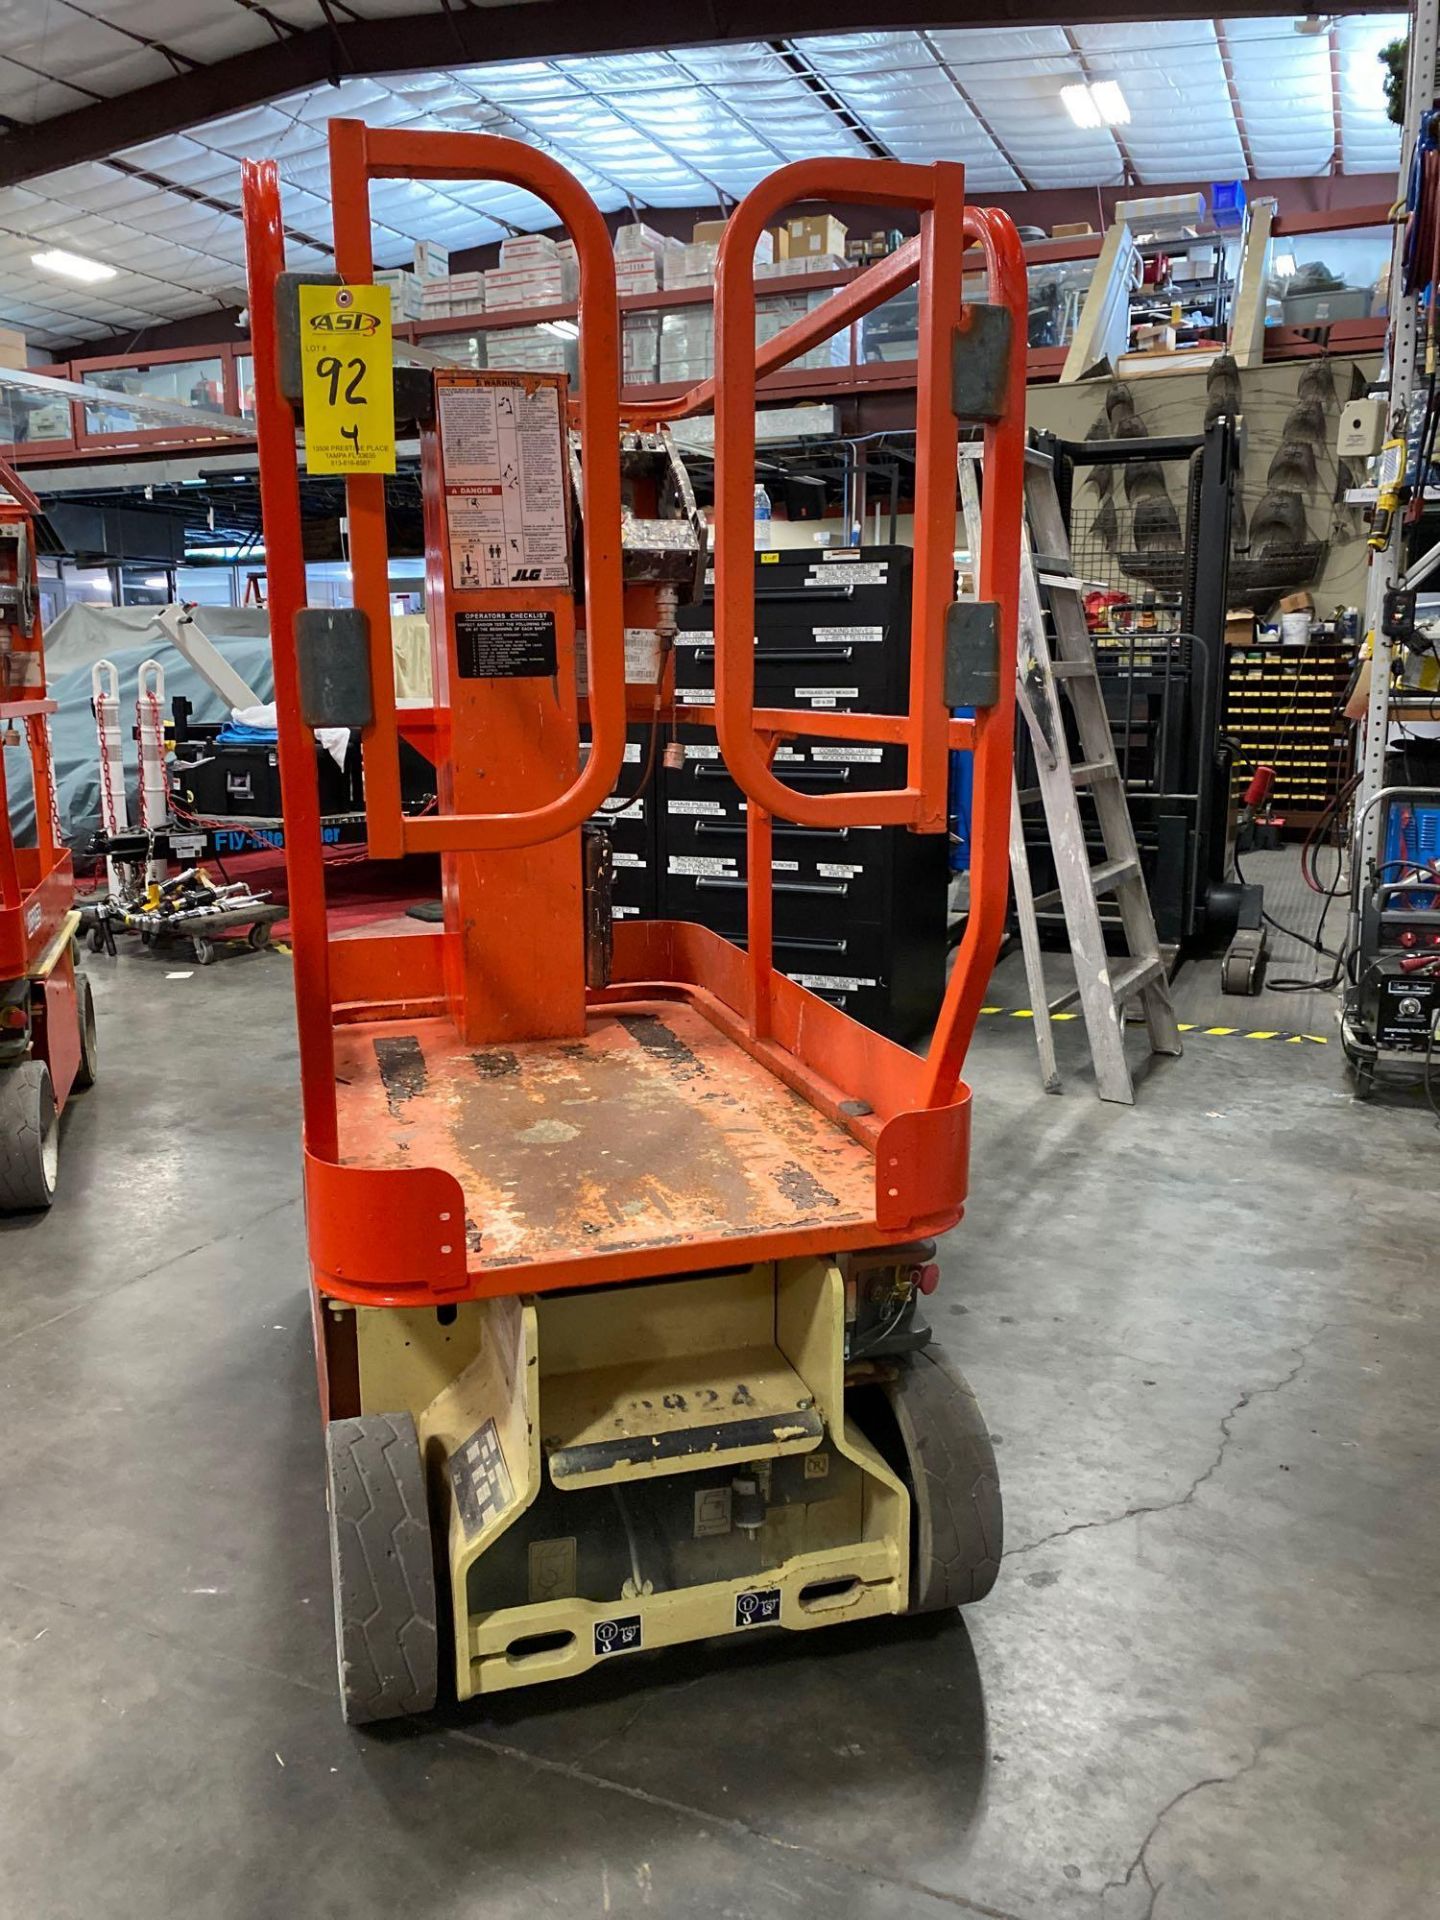 JLG 1230 ES ELECTRIC MAN LIFT, SELF PROPELLED, BUILT IN BATTERY CHARGER, 12' PLATFORM HEIGHT, APPROX - Image 2 of 6